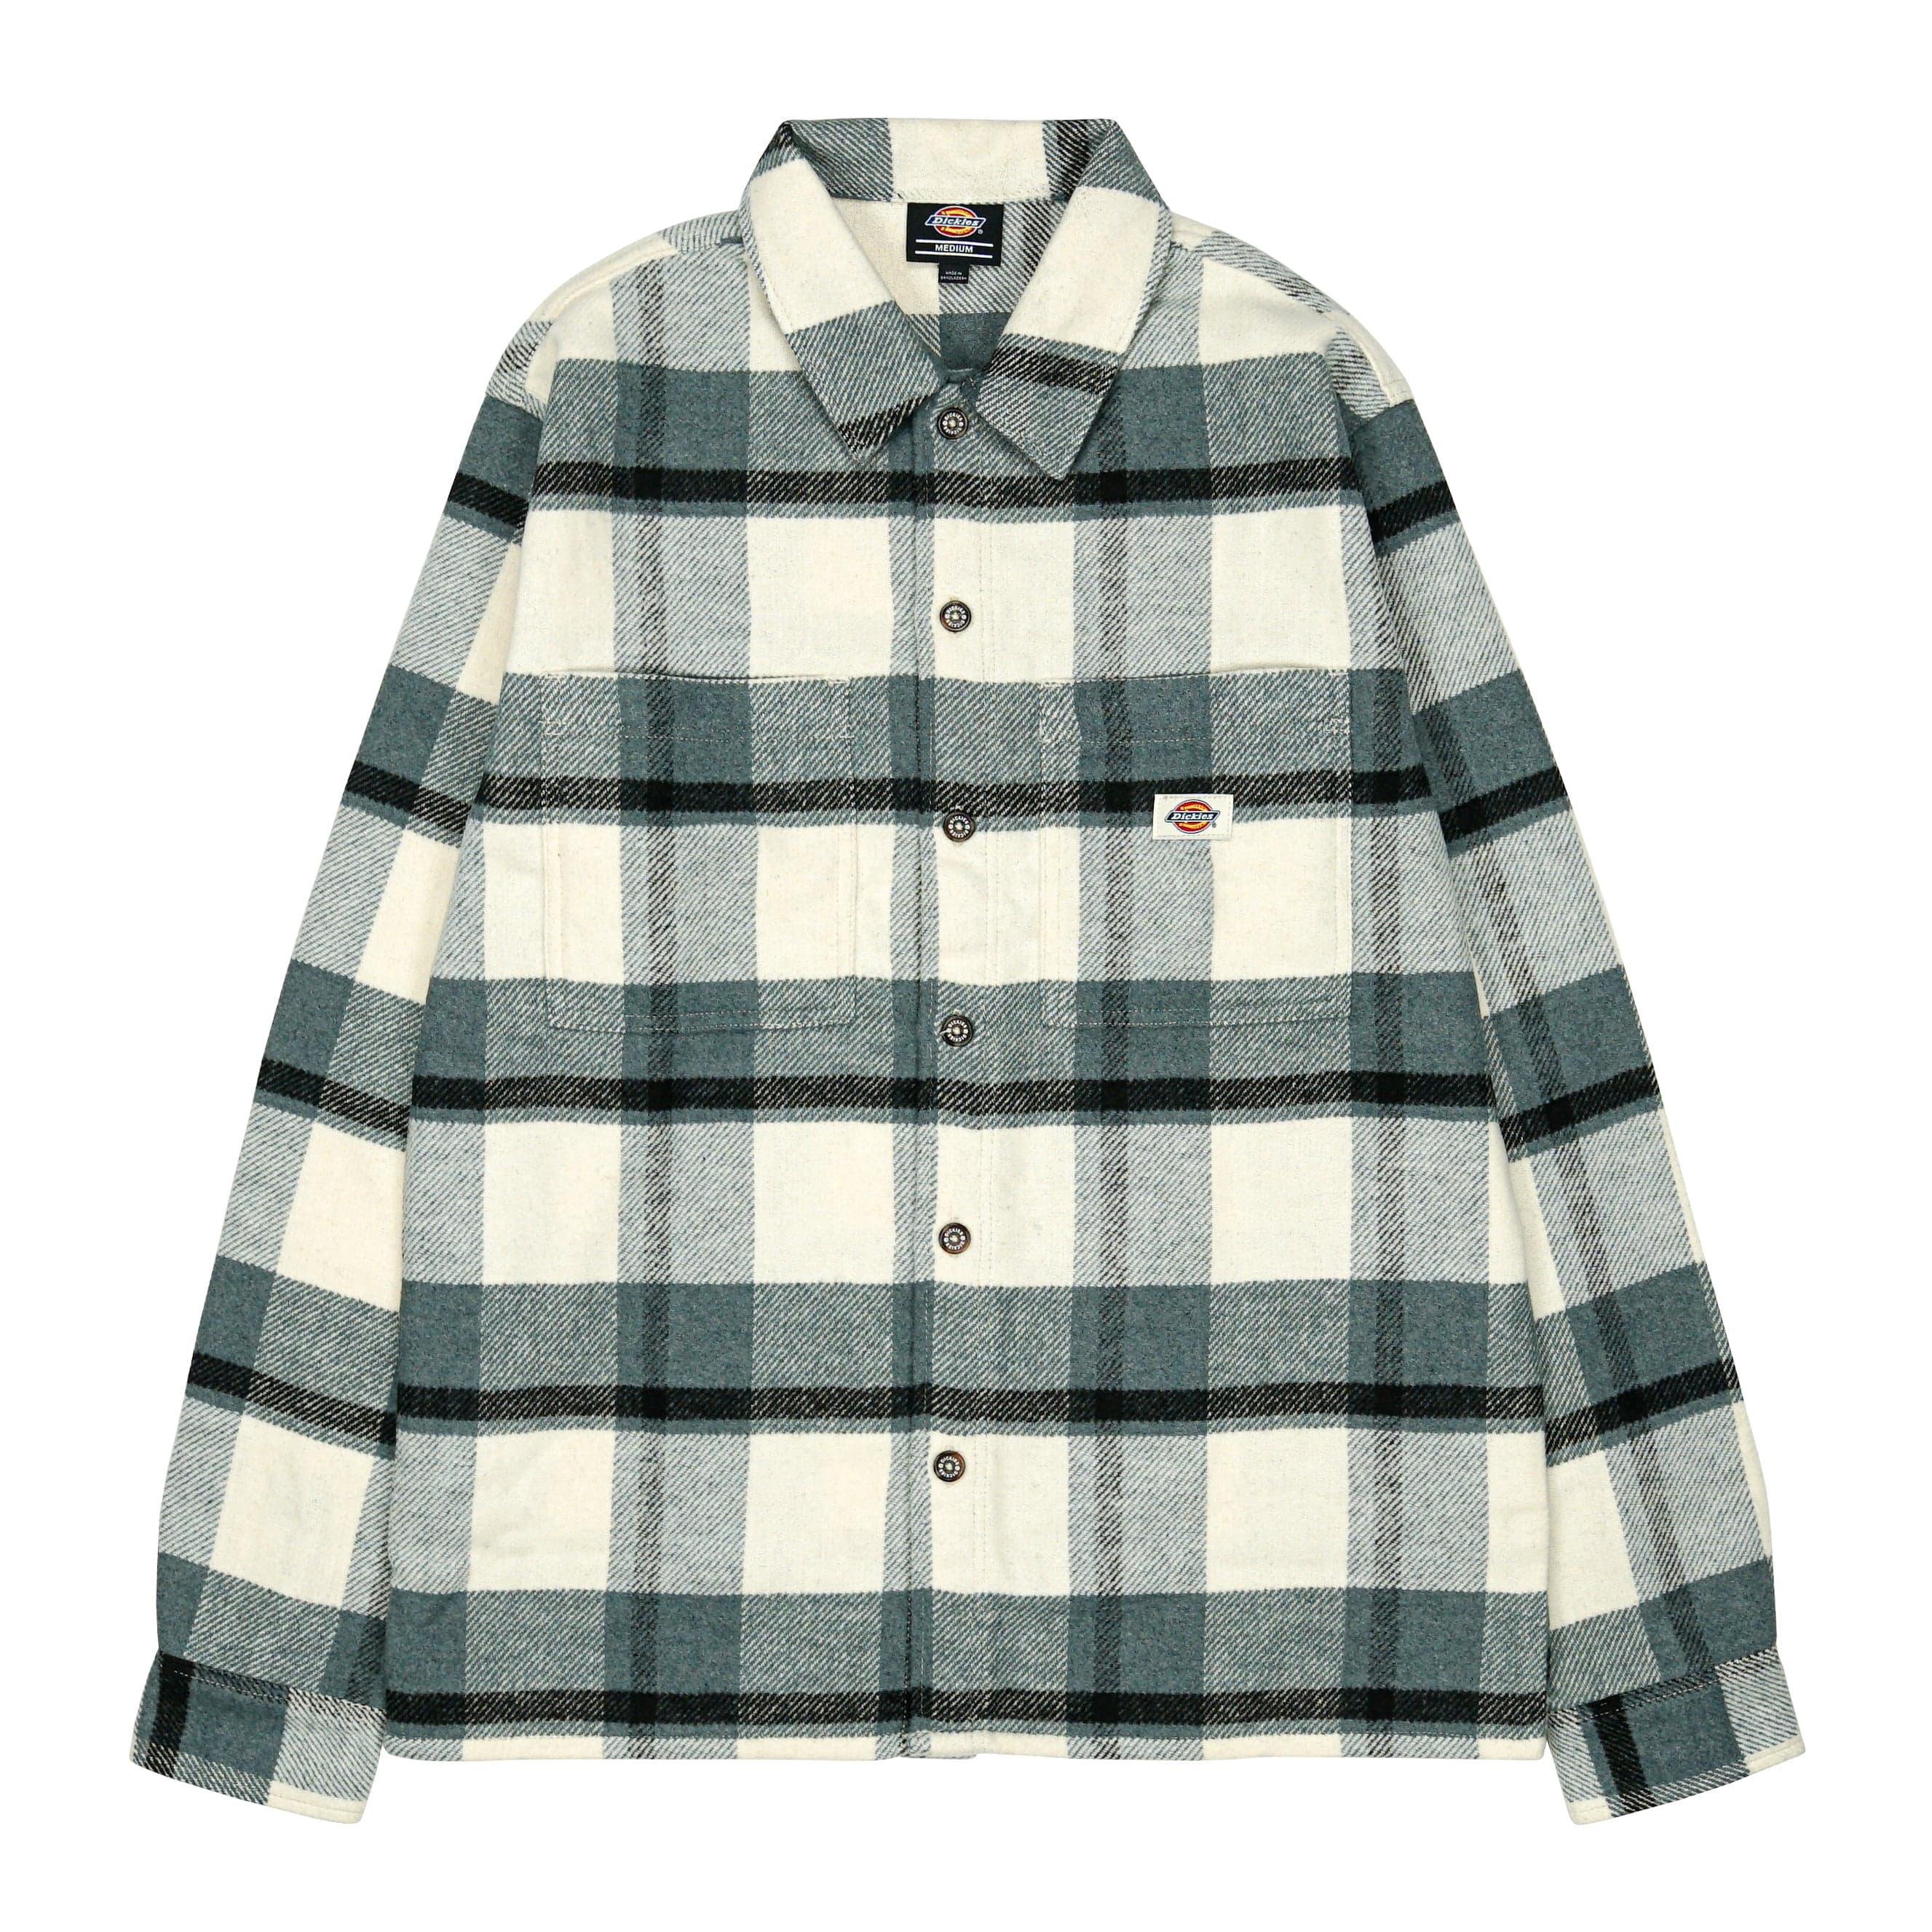 Woven Plaid Flannel Button-up in morning blue